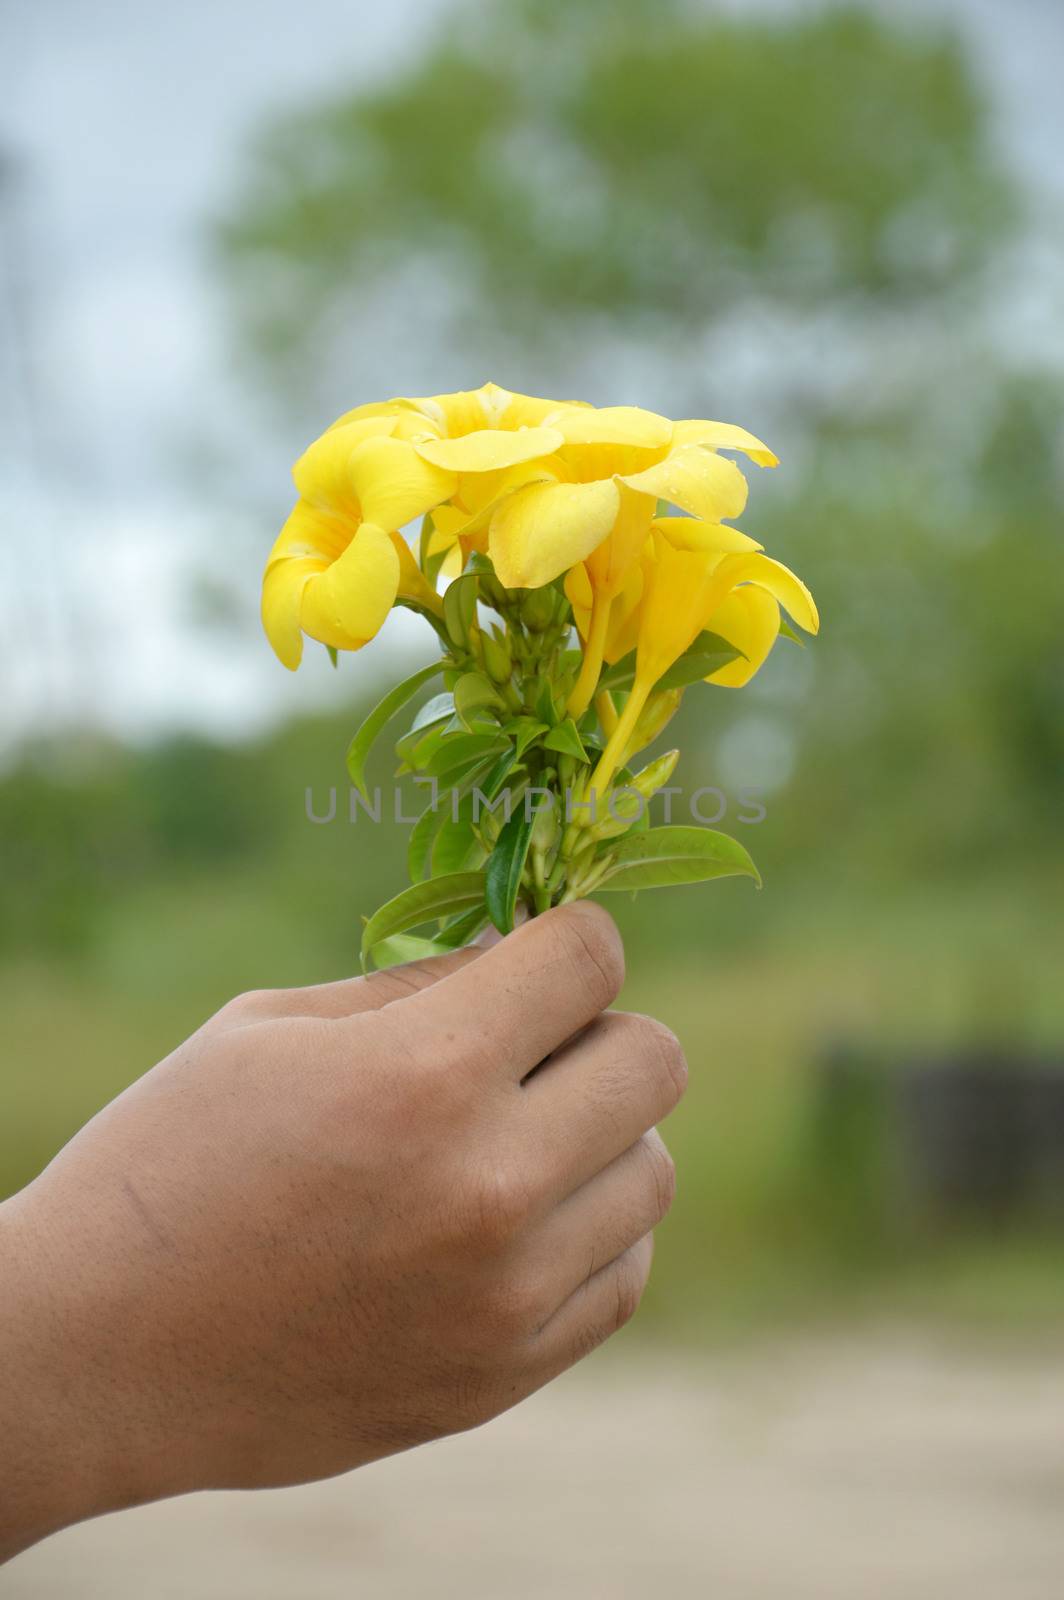 hand holding a yellow allamanda flower against natural background